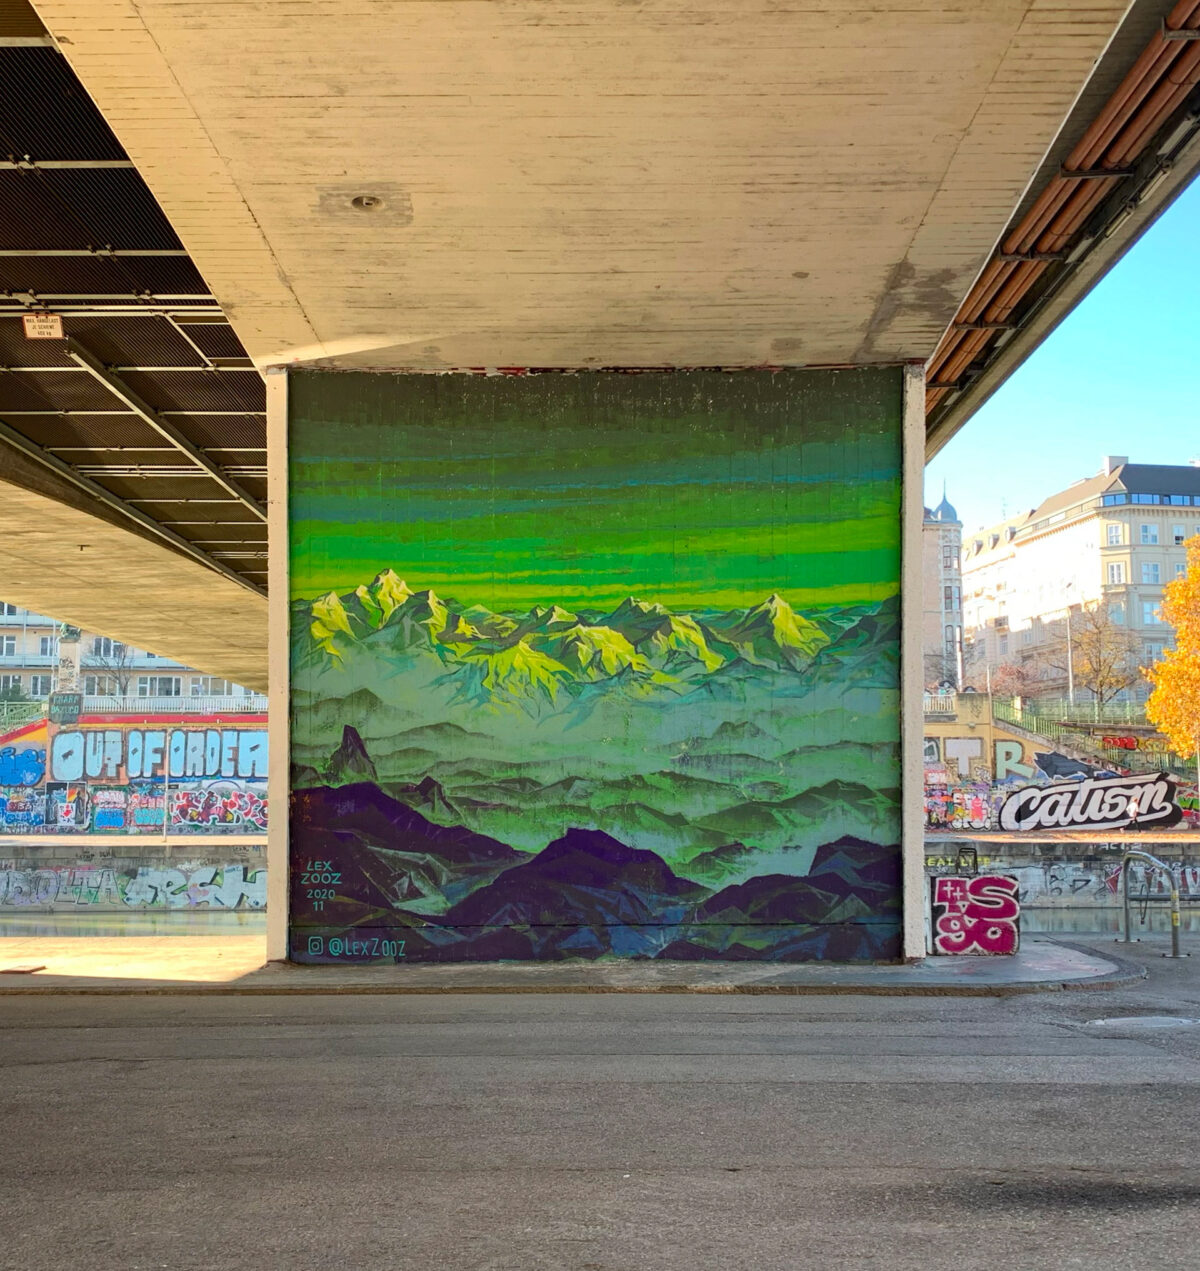 Mesmerizing Murals In Vivid Colors By Lex Zooz (6)